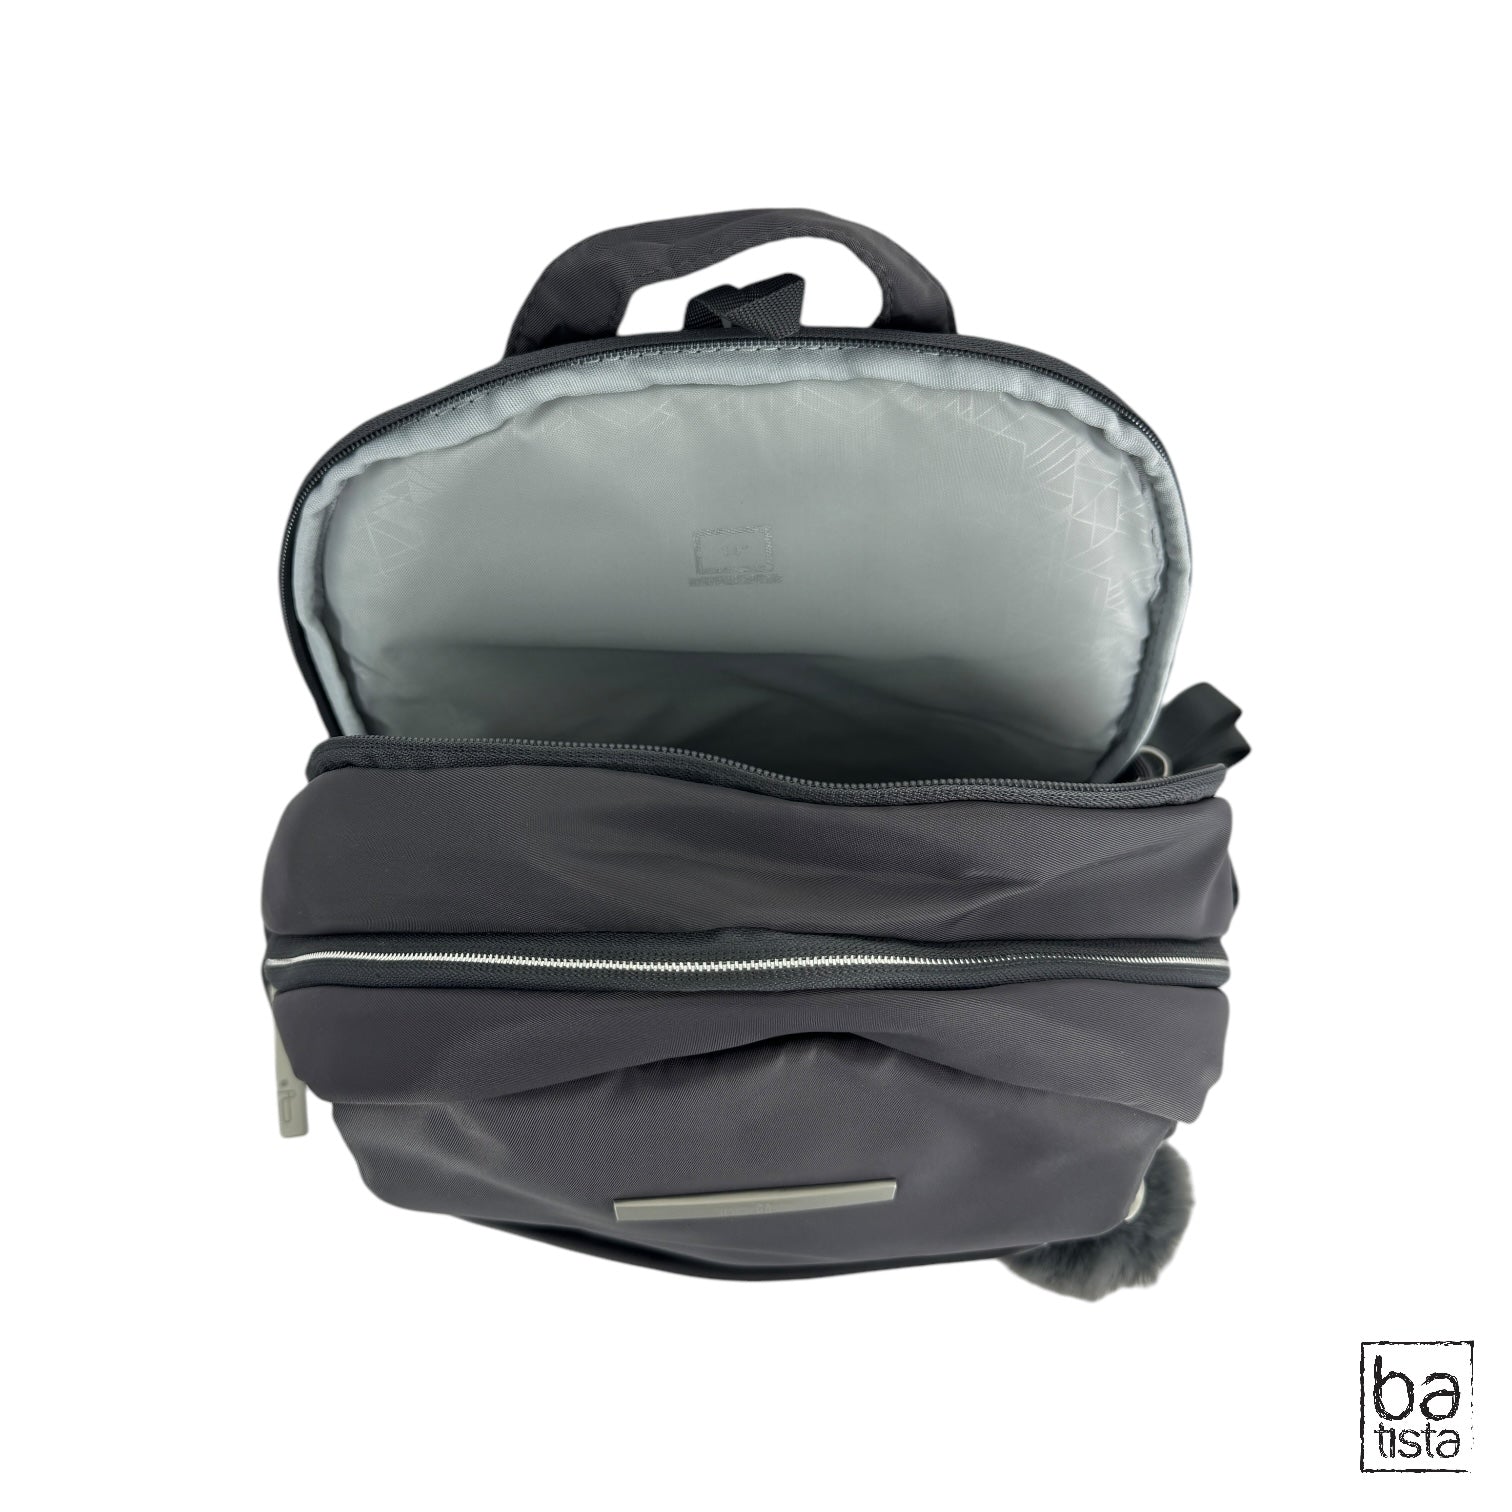 Morral Totto Adelaide 1 2.0 G10 Gris